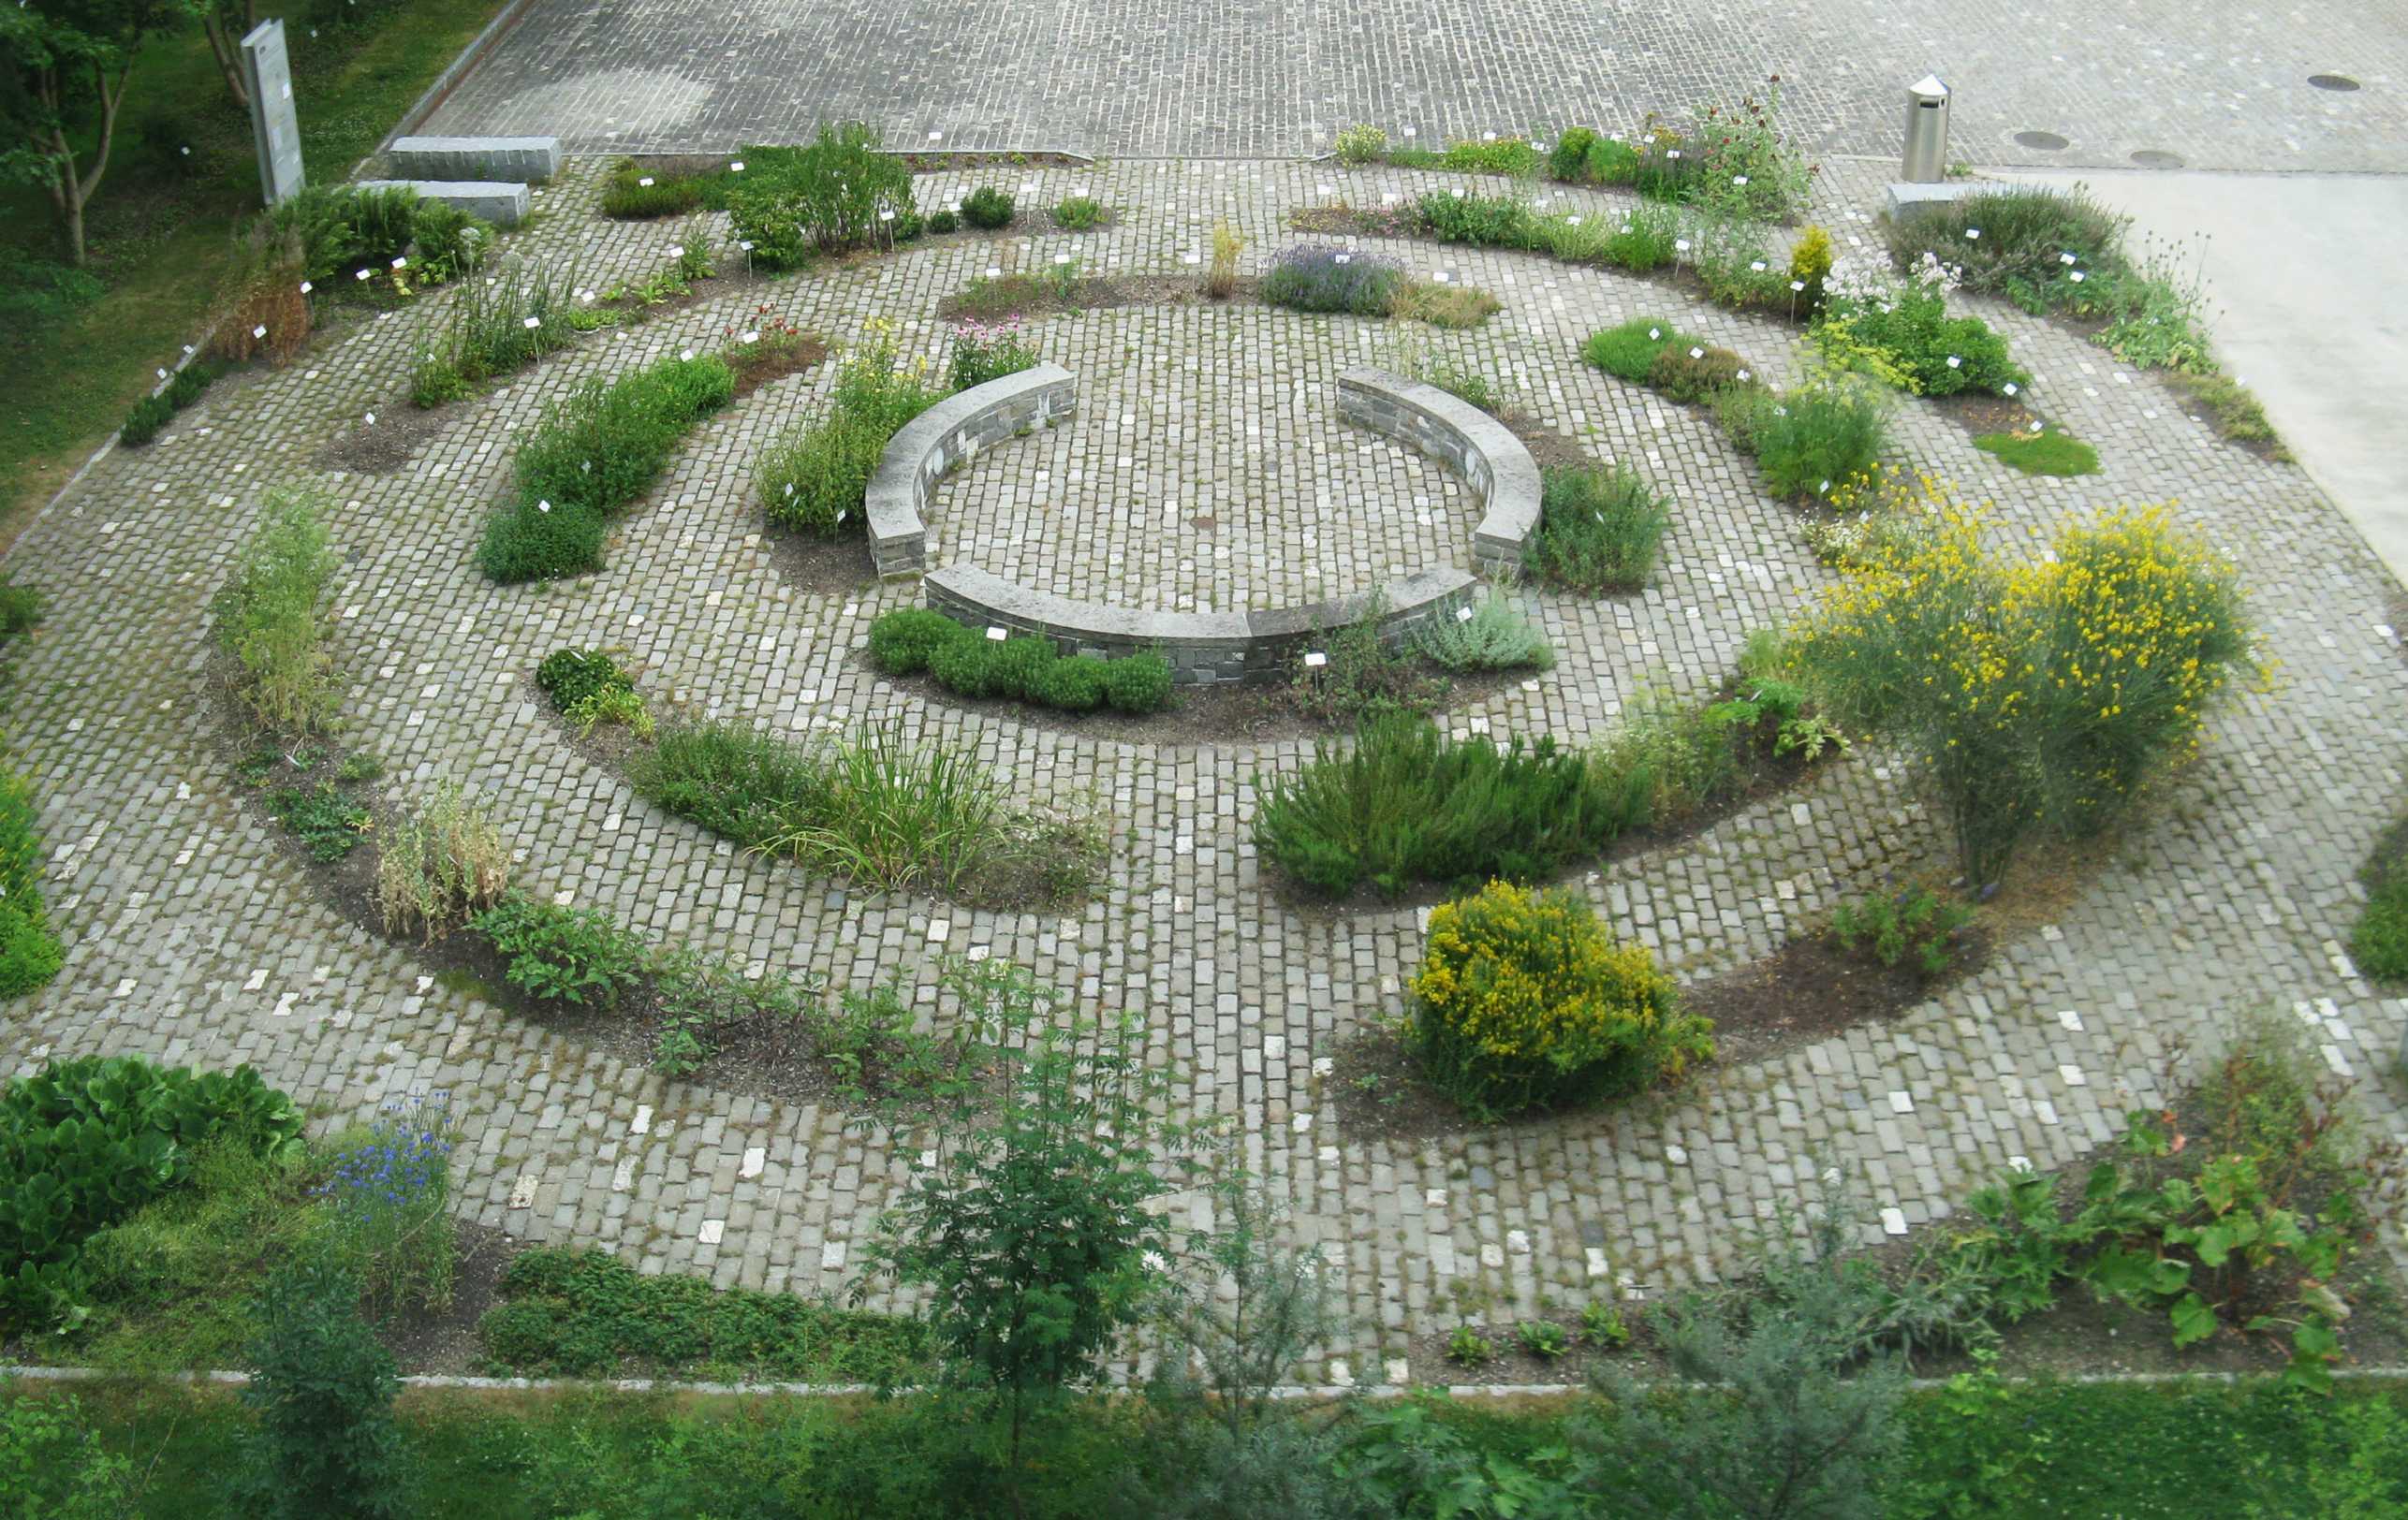 In 2005, around 170 medicinal plants and 30 woody plants were combined to form a special garden on the Hönggerberg 